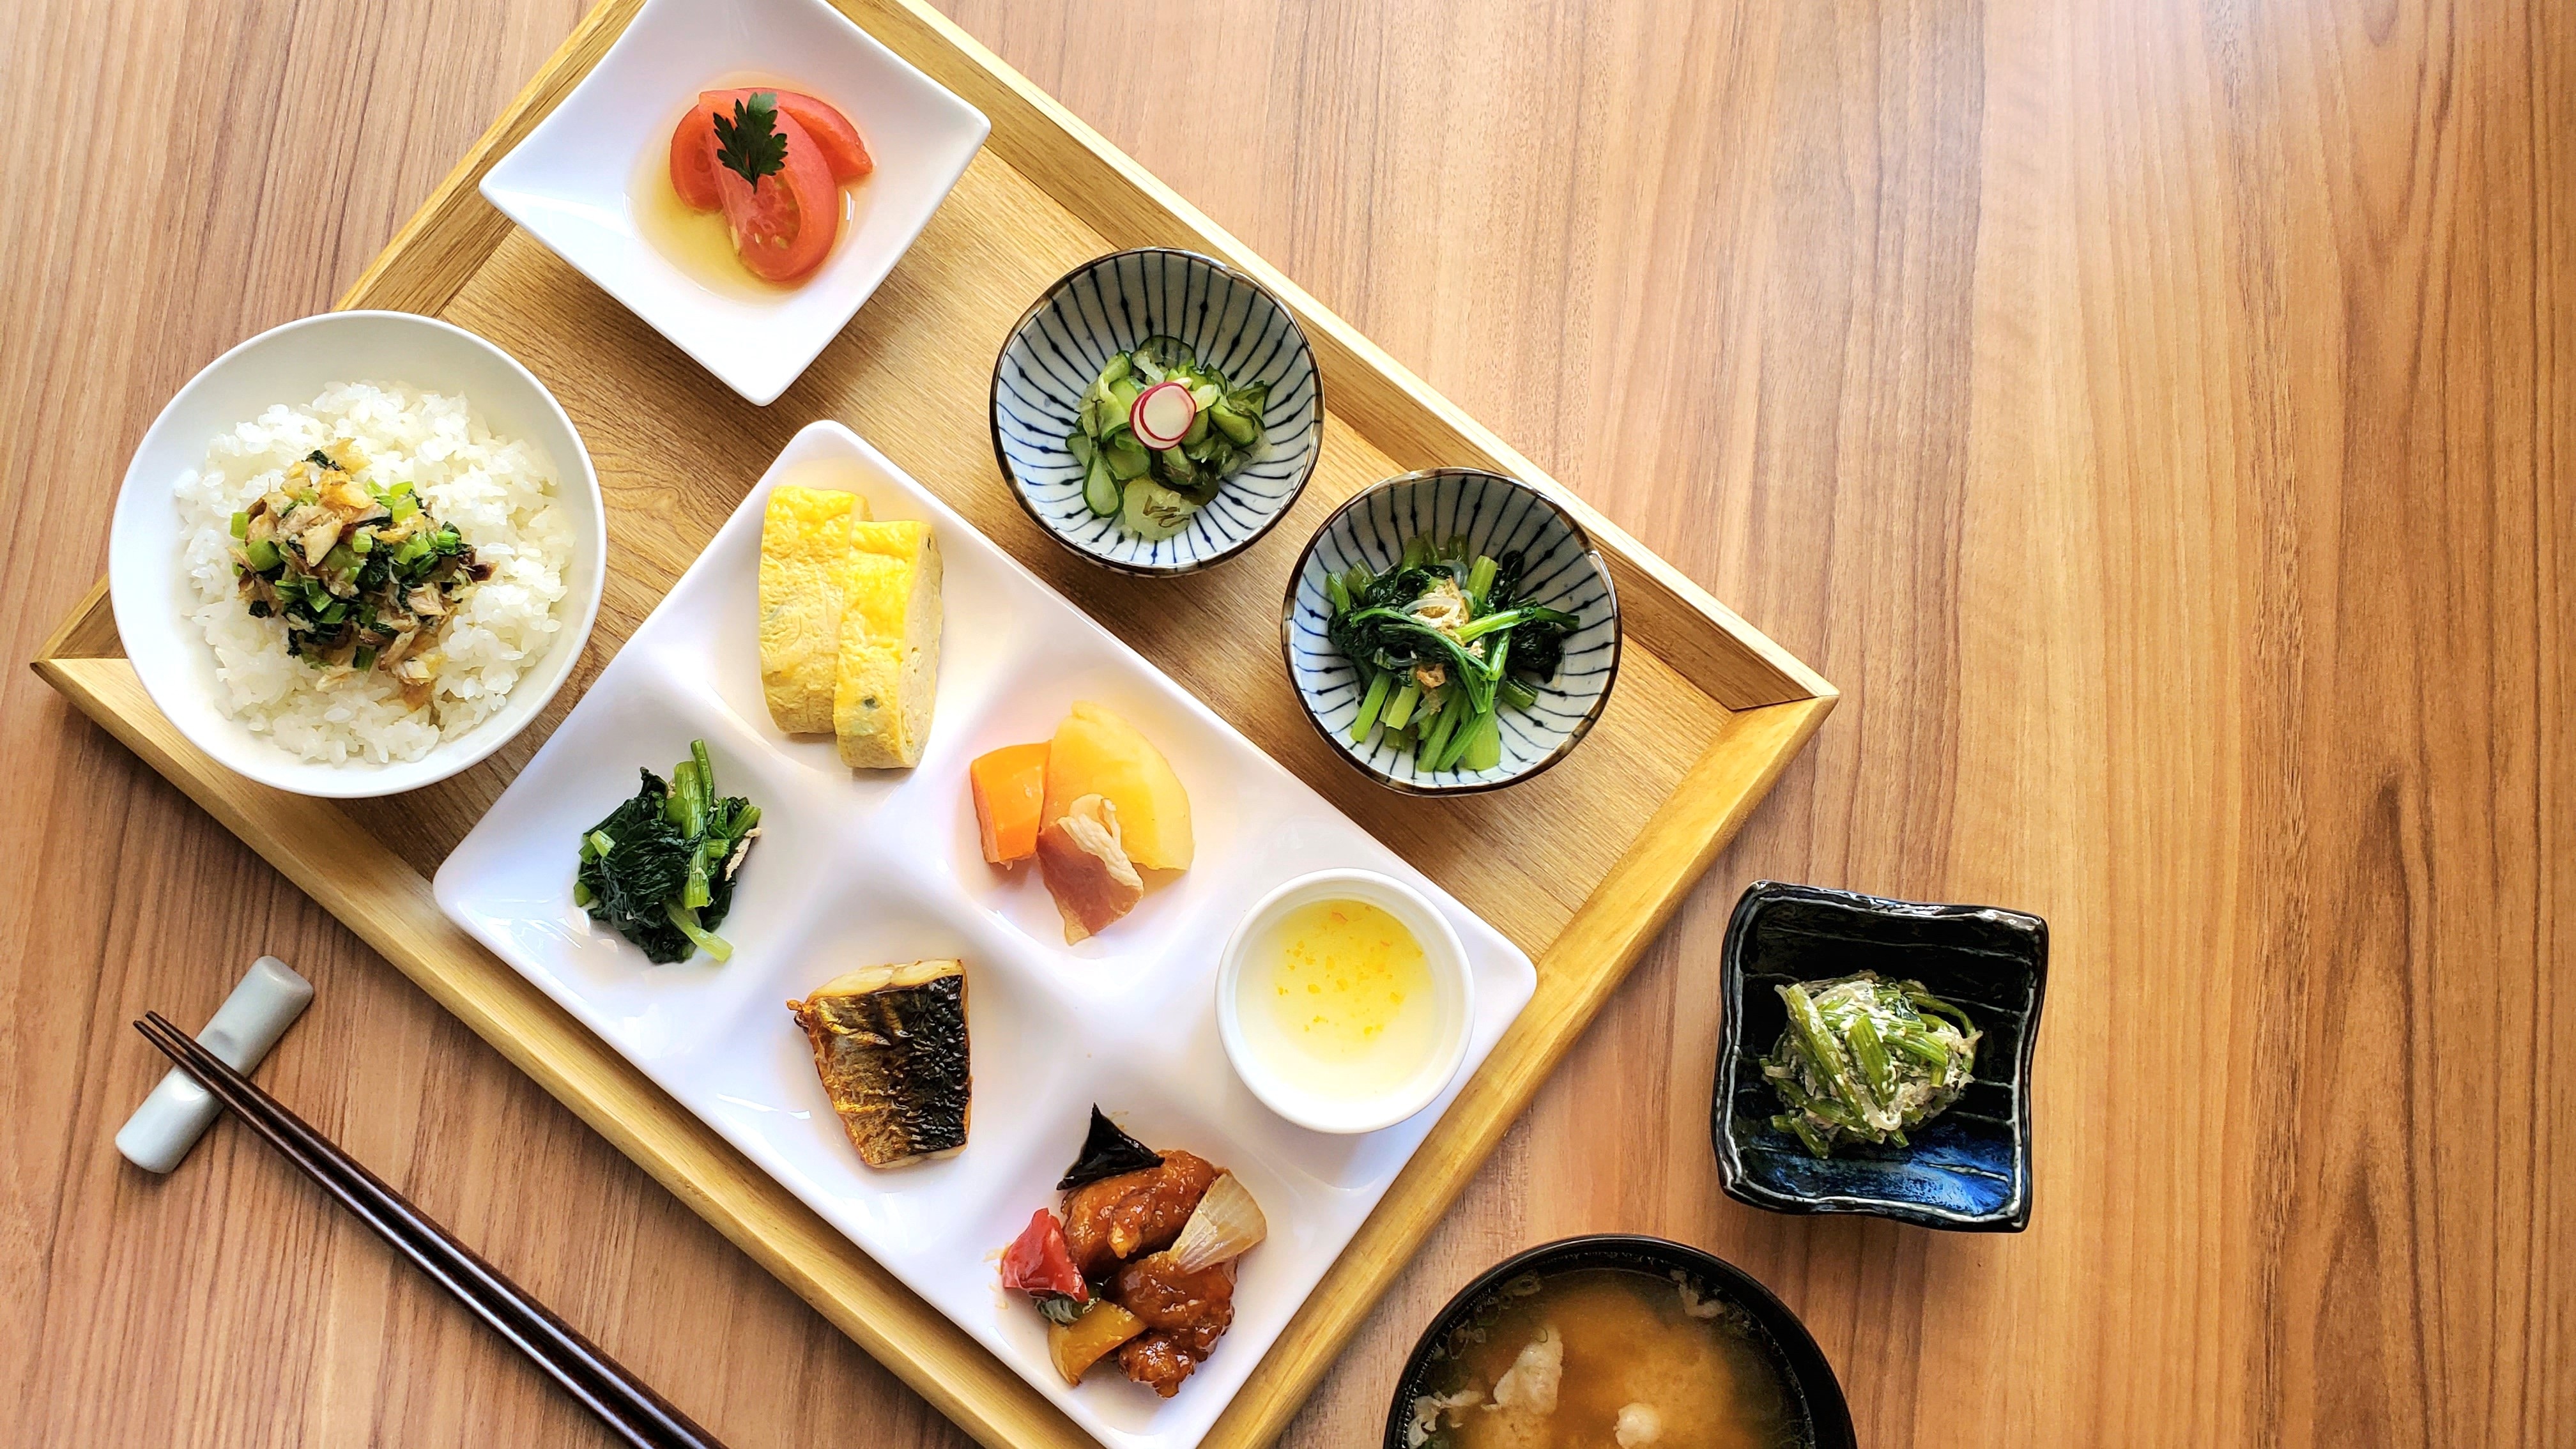 ◆Breakfast buffet with mainly Japanese food ◆《Sample arrangement》